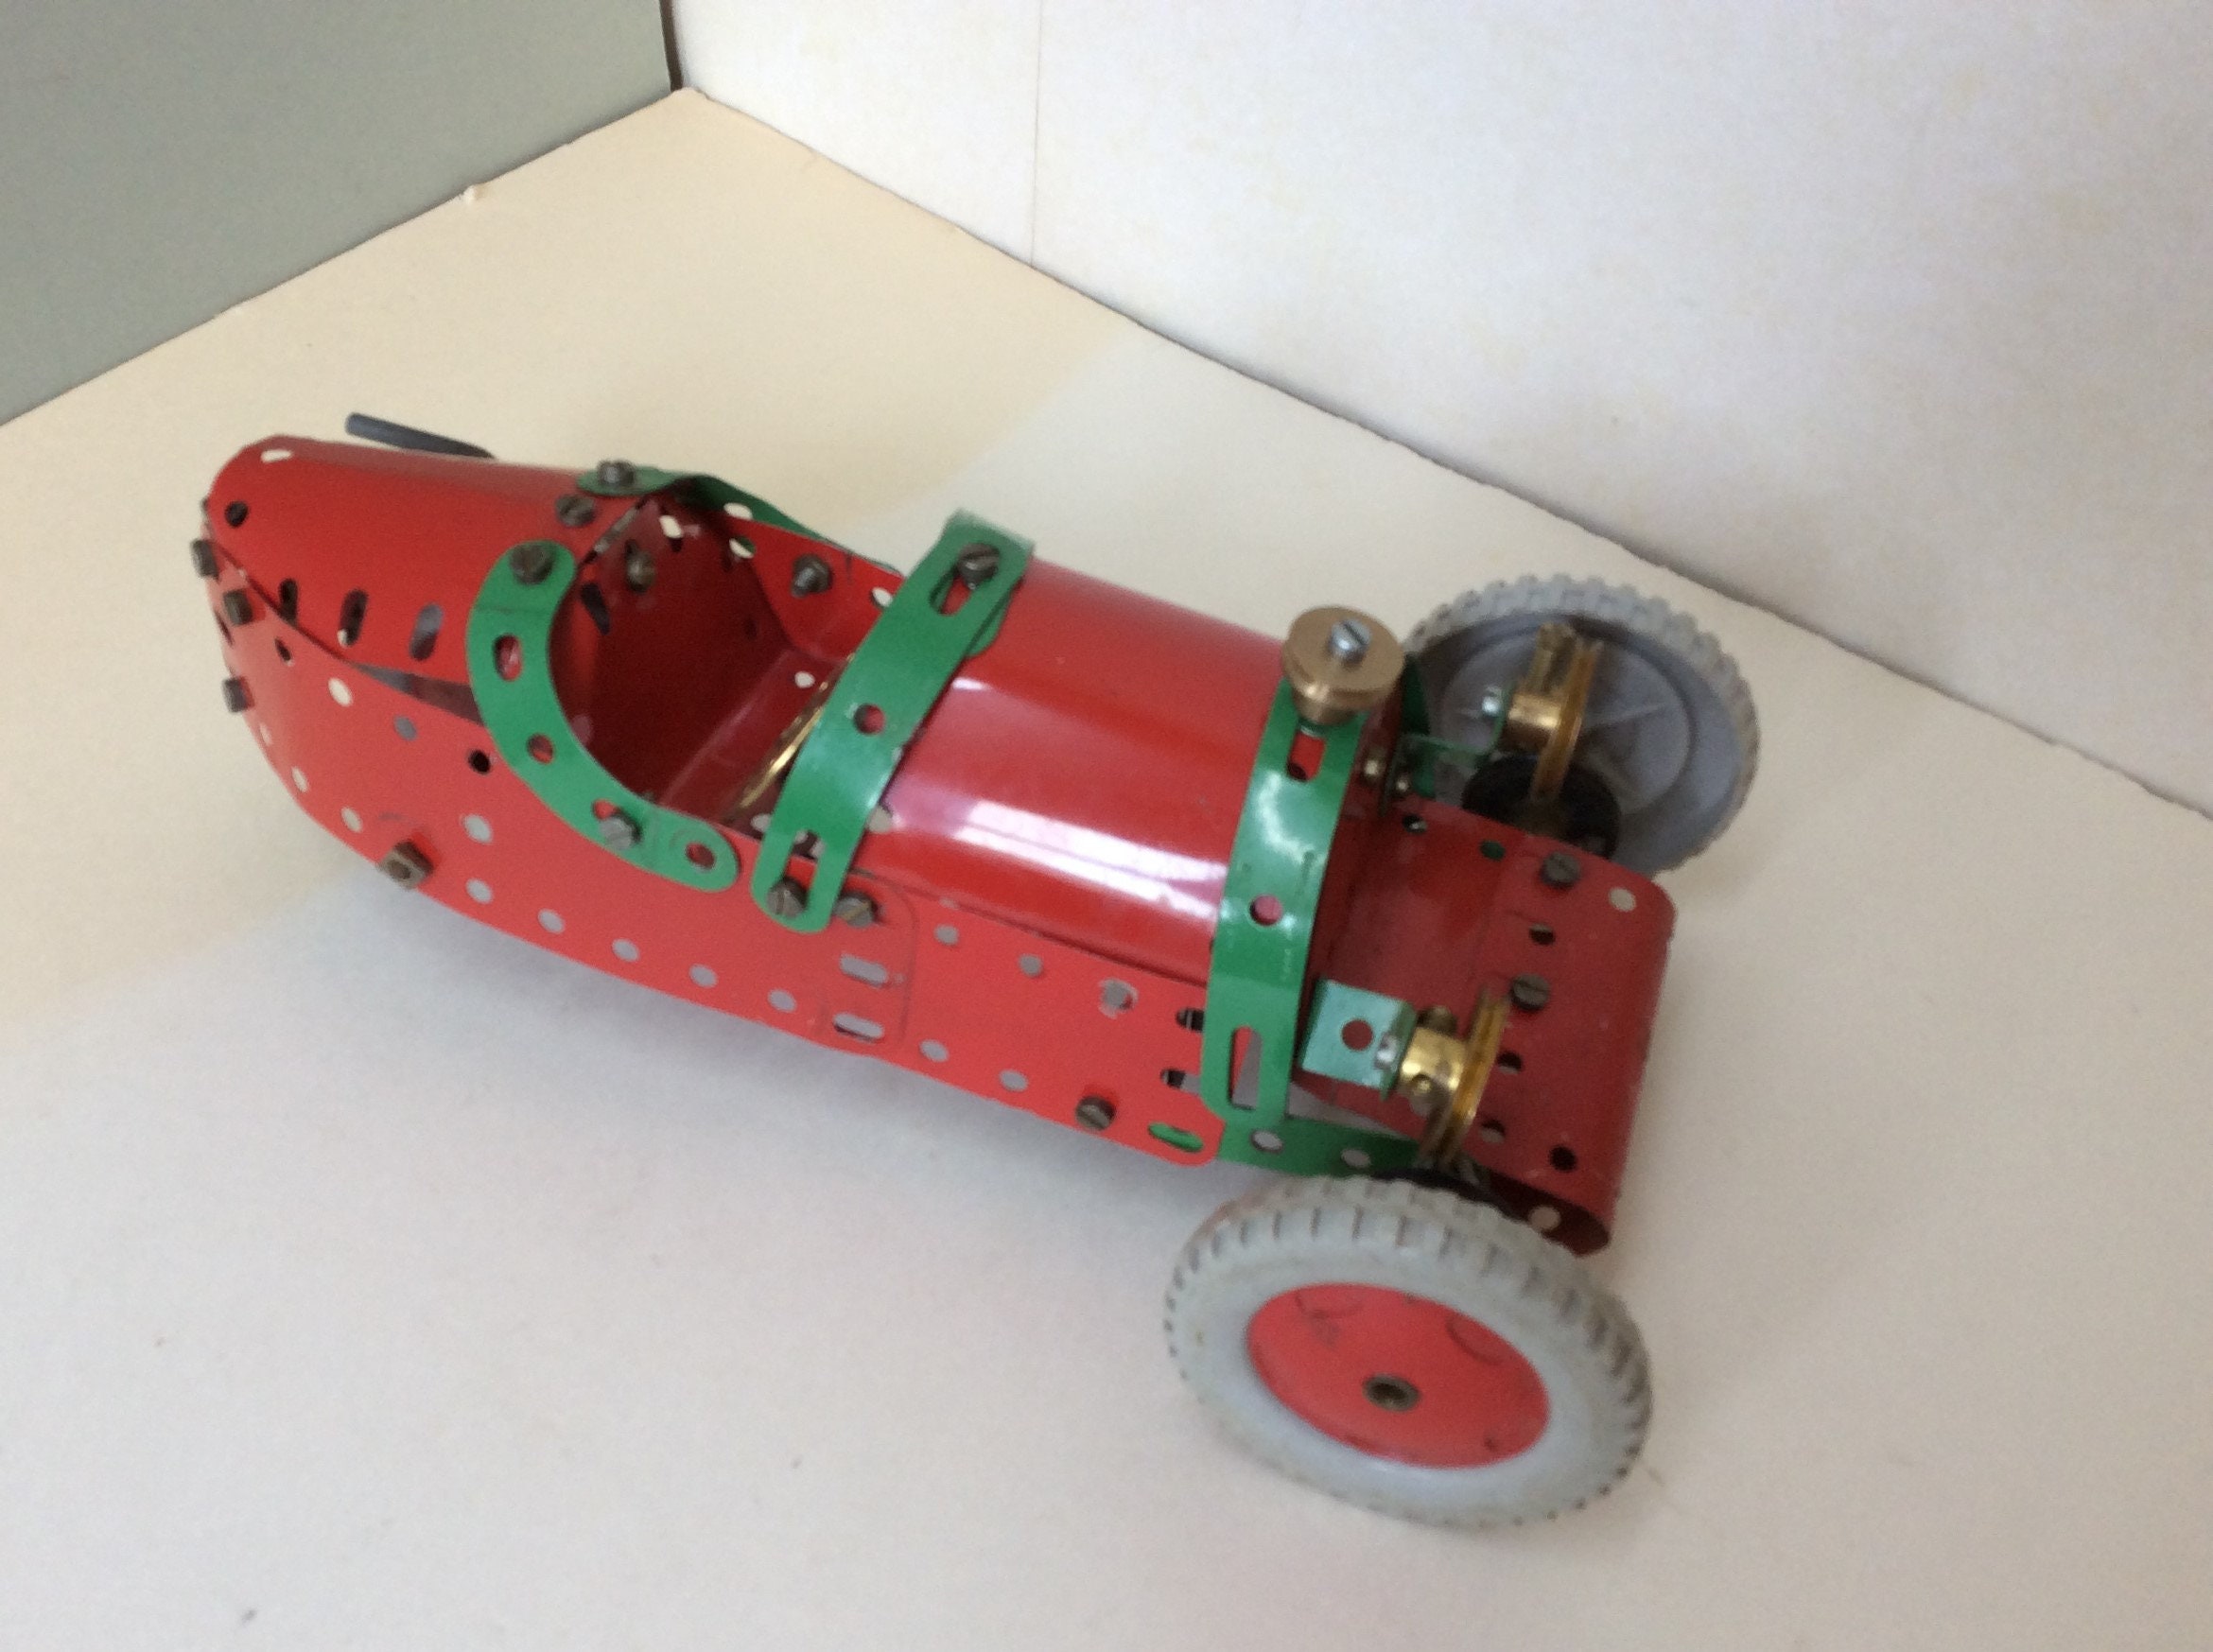 Vintage Meccano Car Scratch Built With Red & Green Meccano Parts